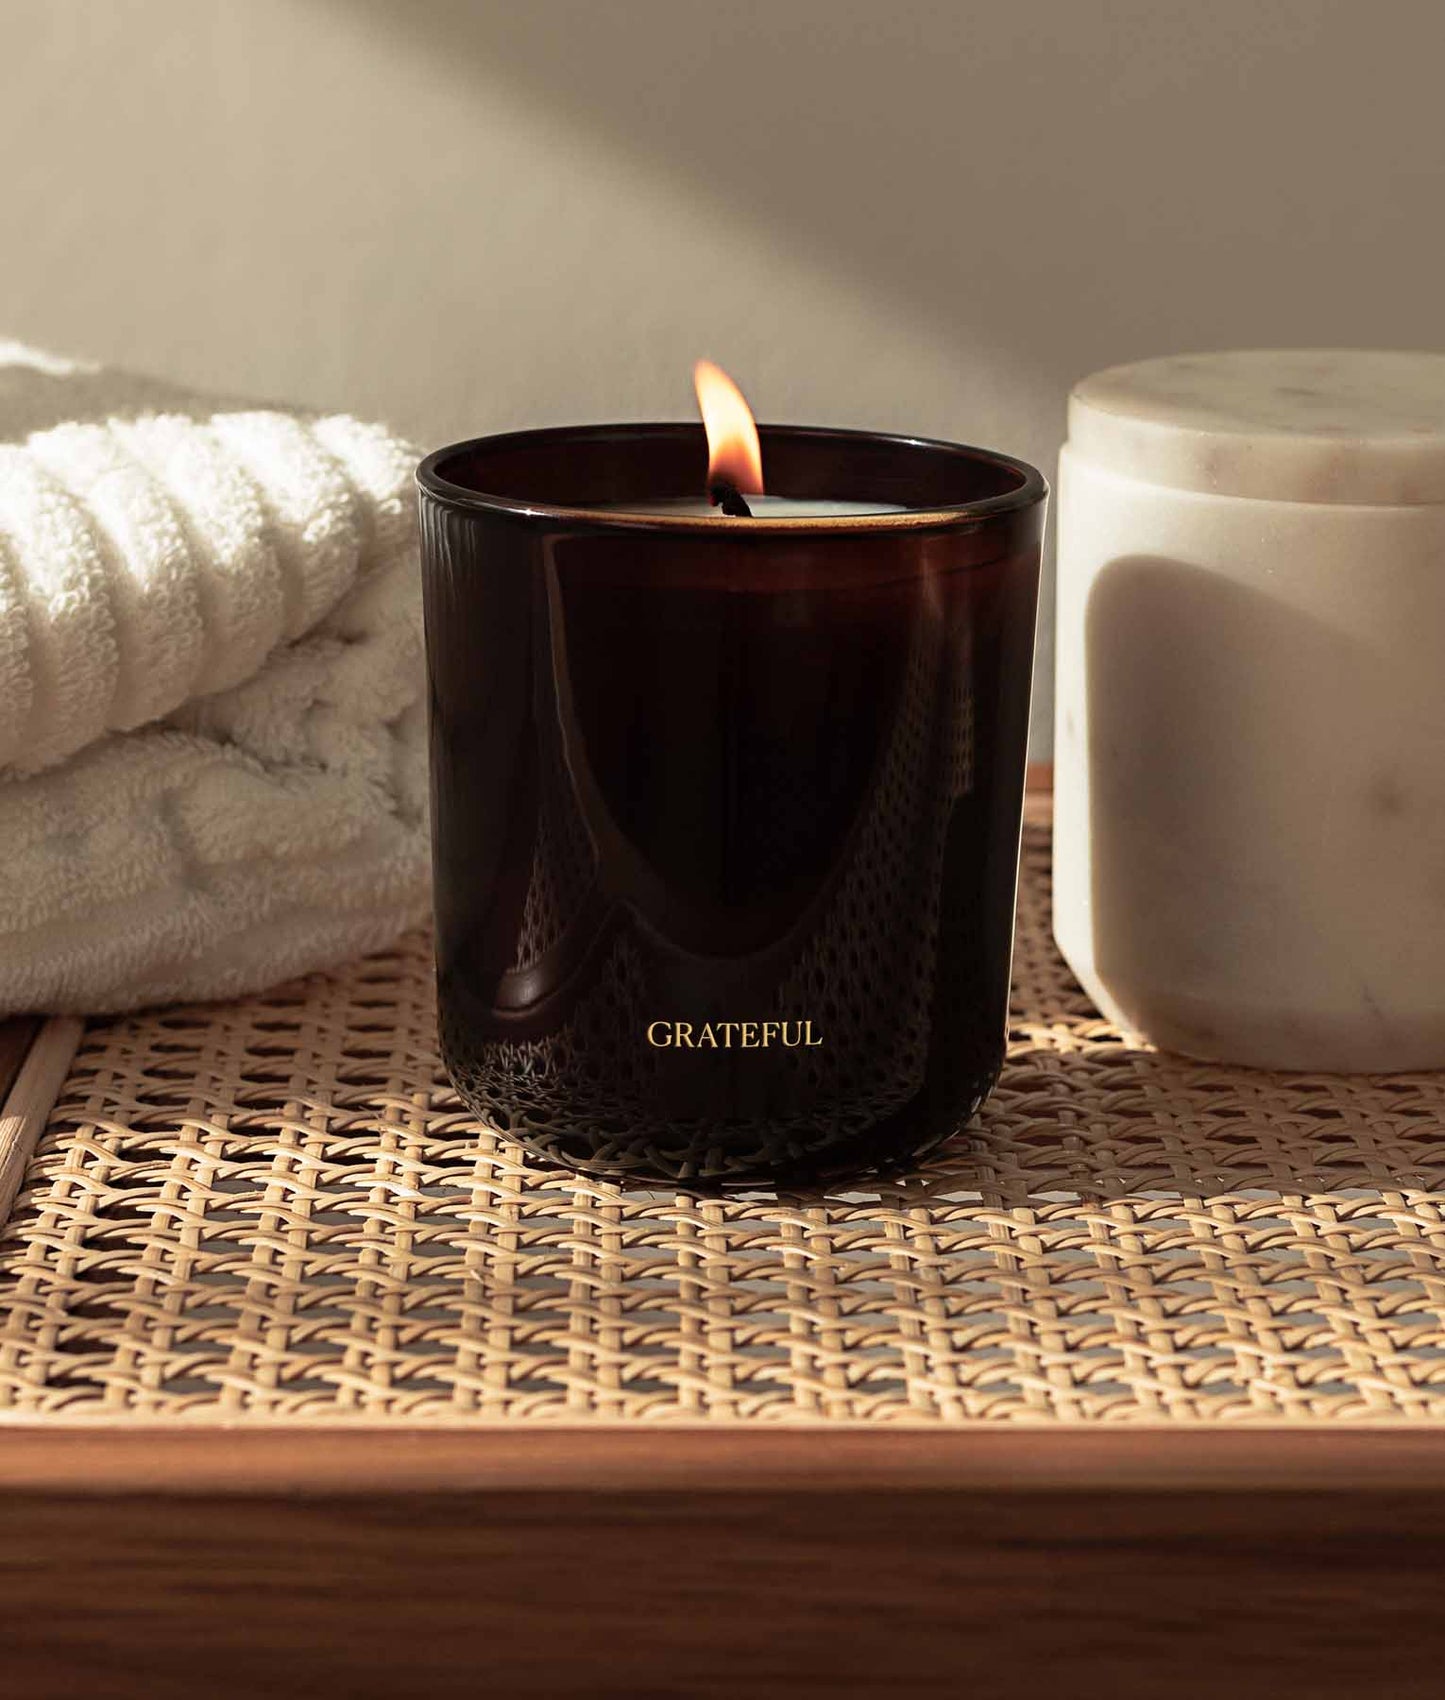 Grateful Pure Essential Oil Candle by Intelligent Change